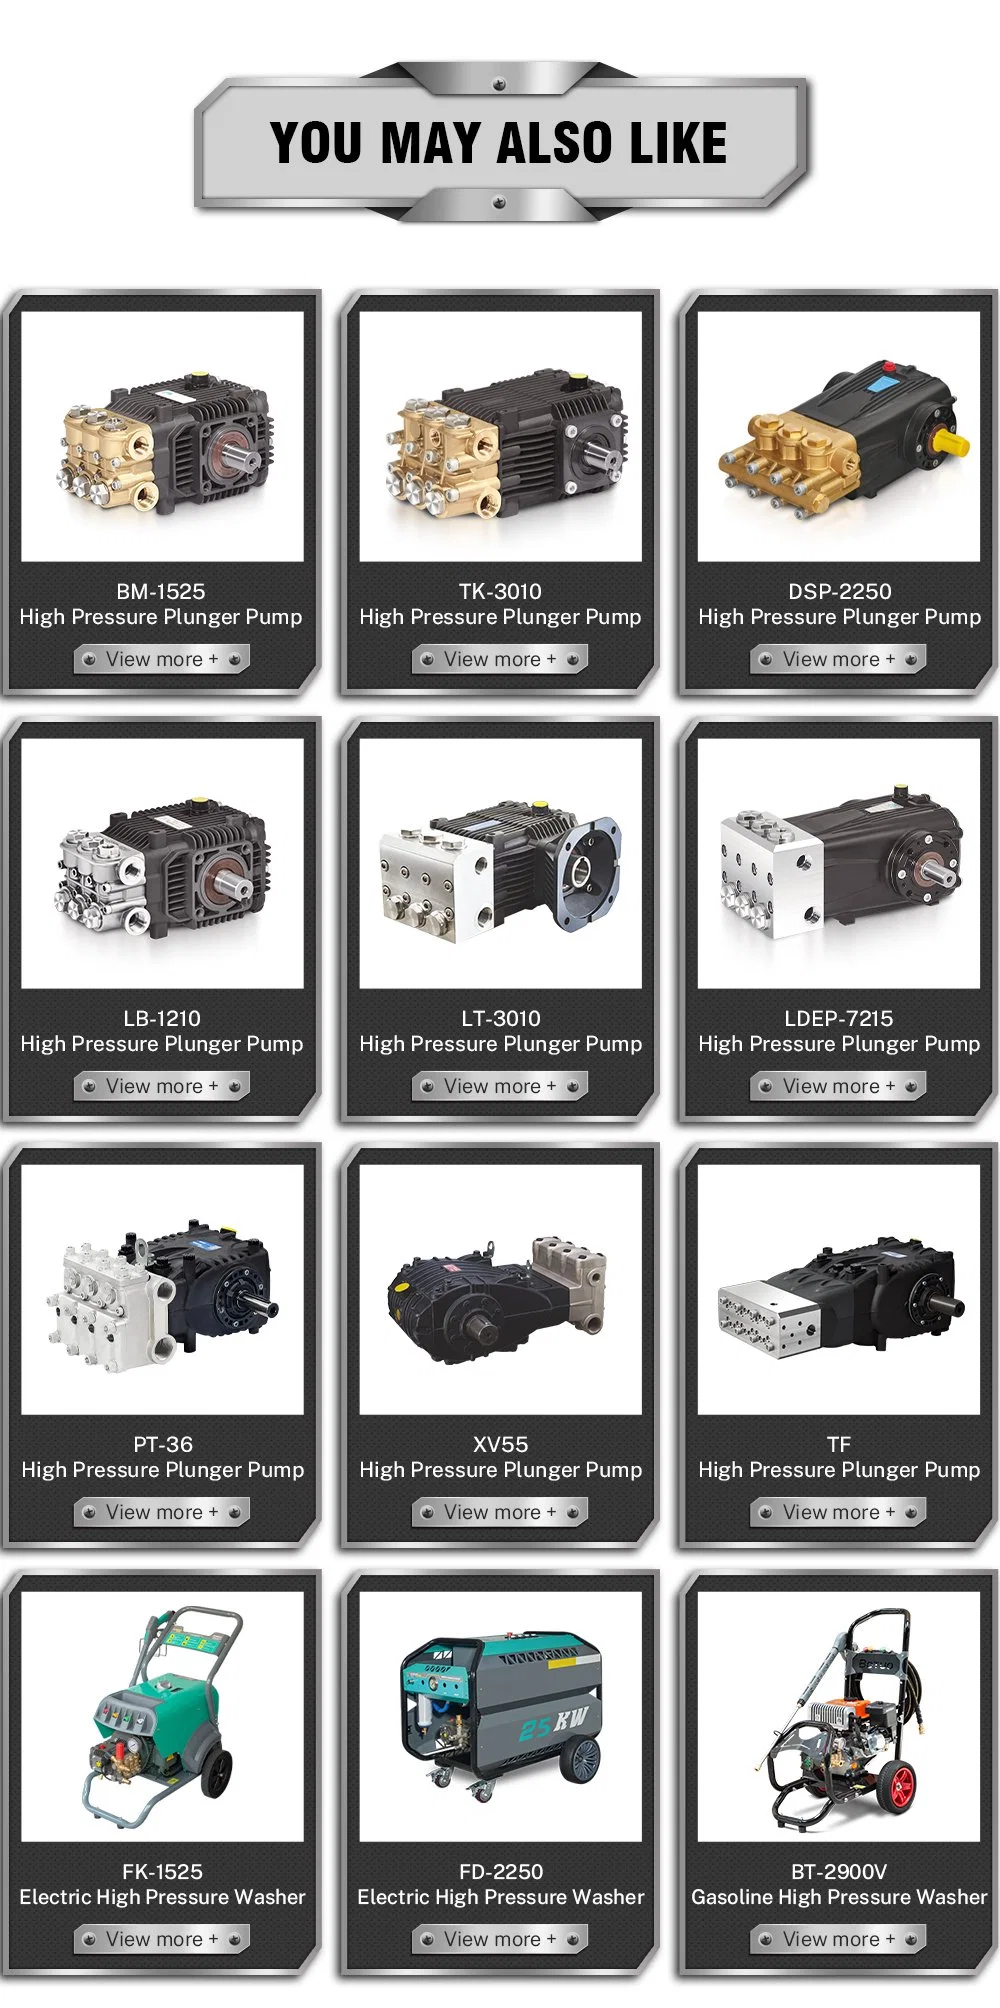 Botuo Gdt Series Industrial Wastewater Treatment Pumps